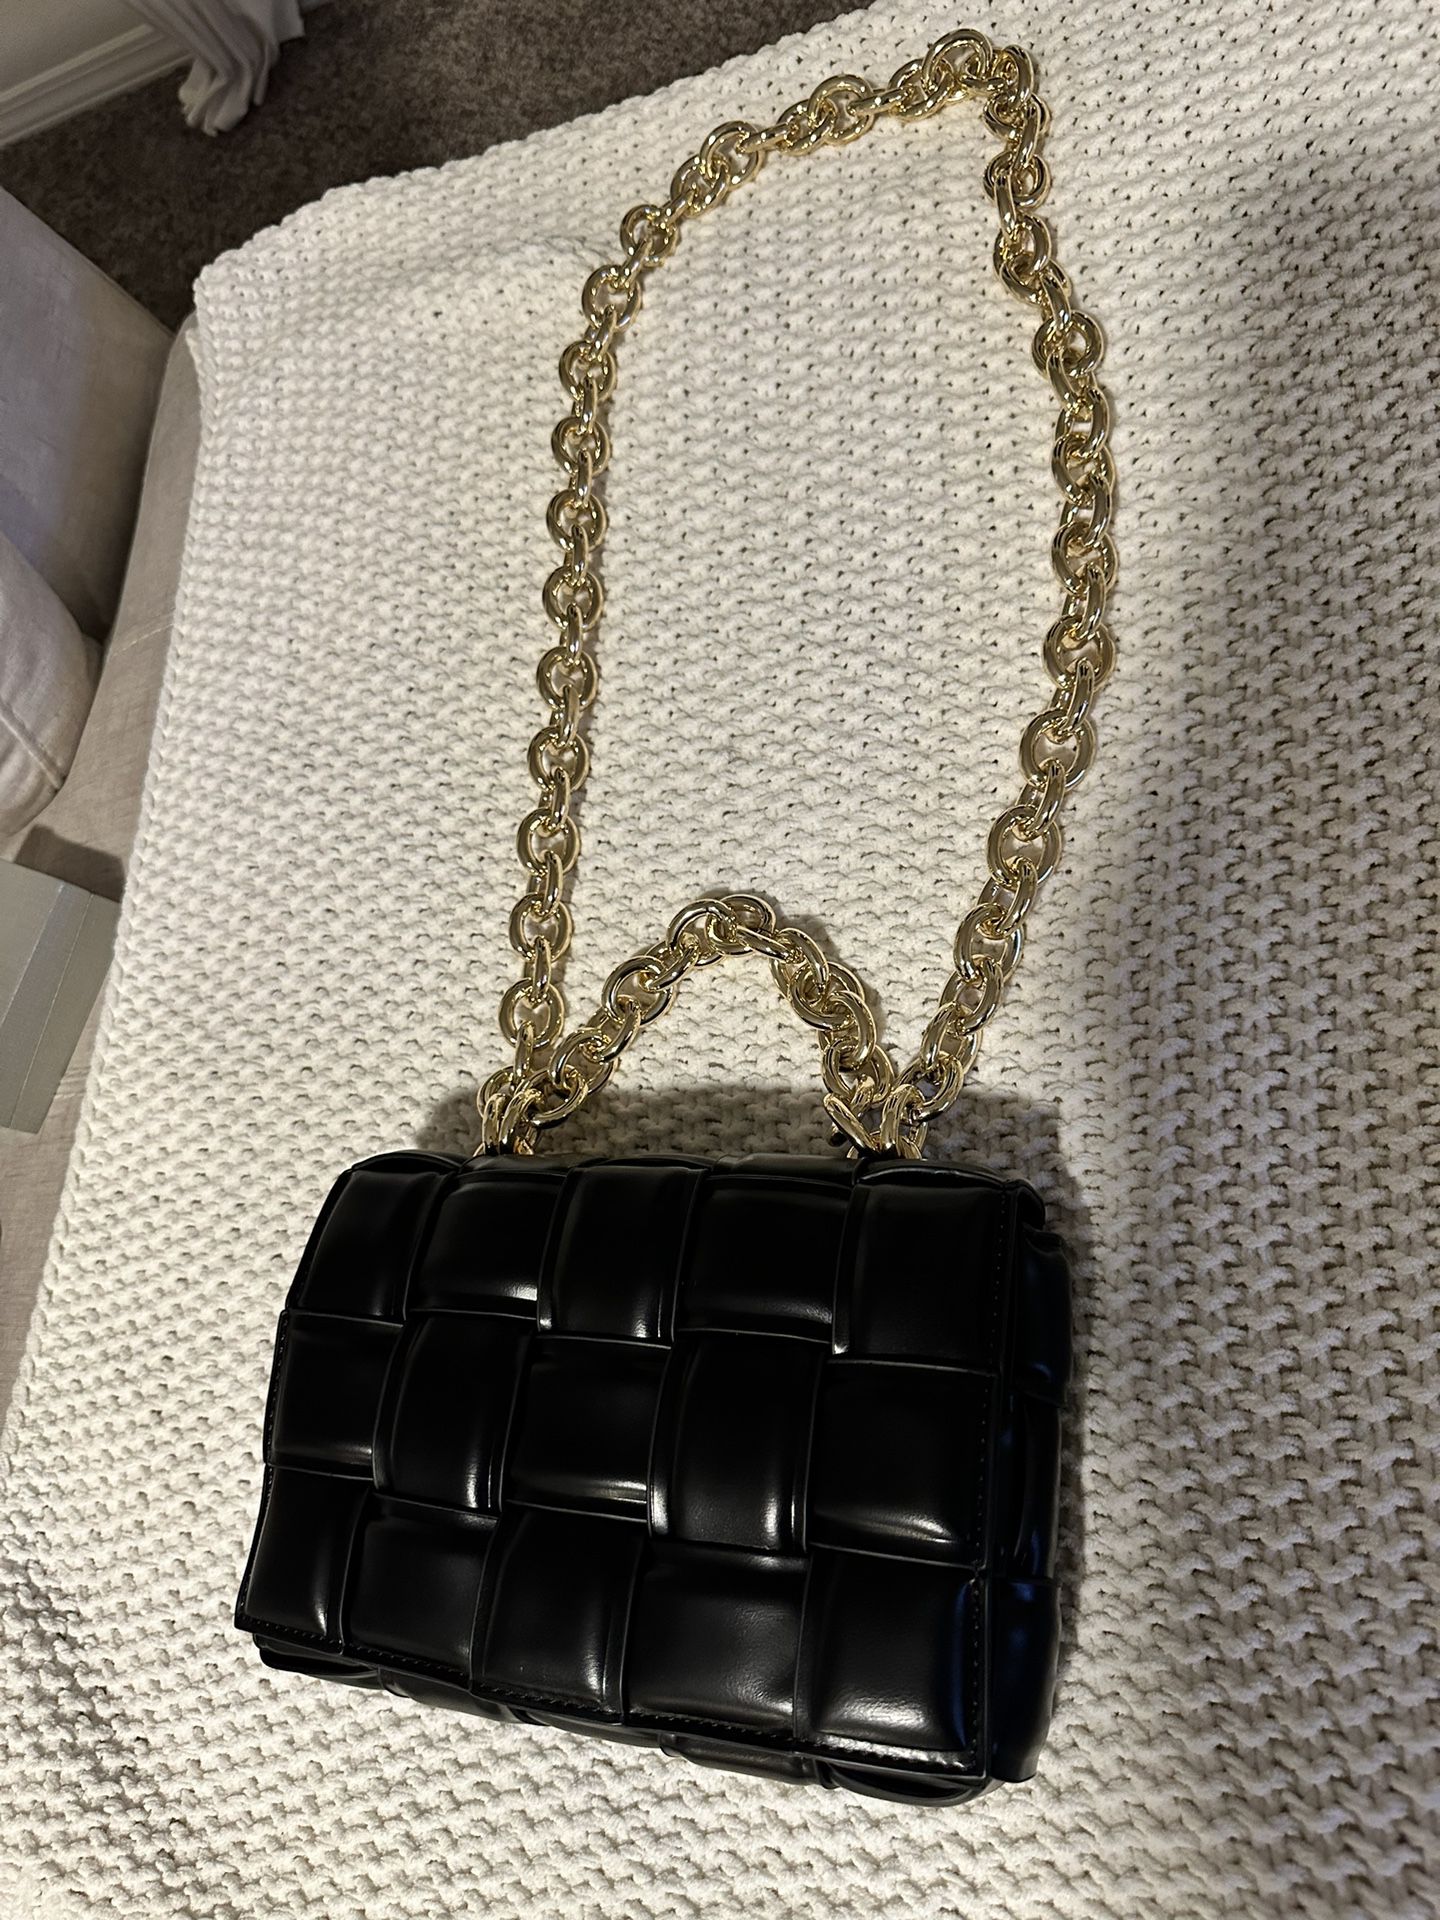 Cute Gold Chain Bag for Sale in Clackamas, OR - OfferUp